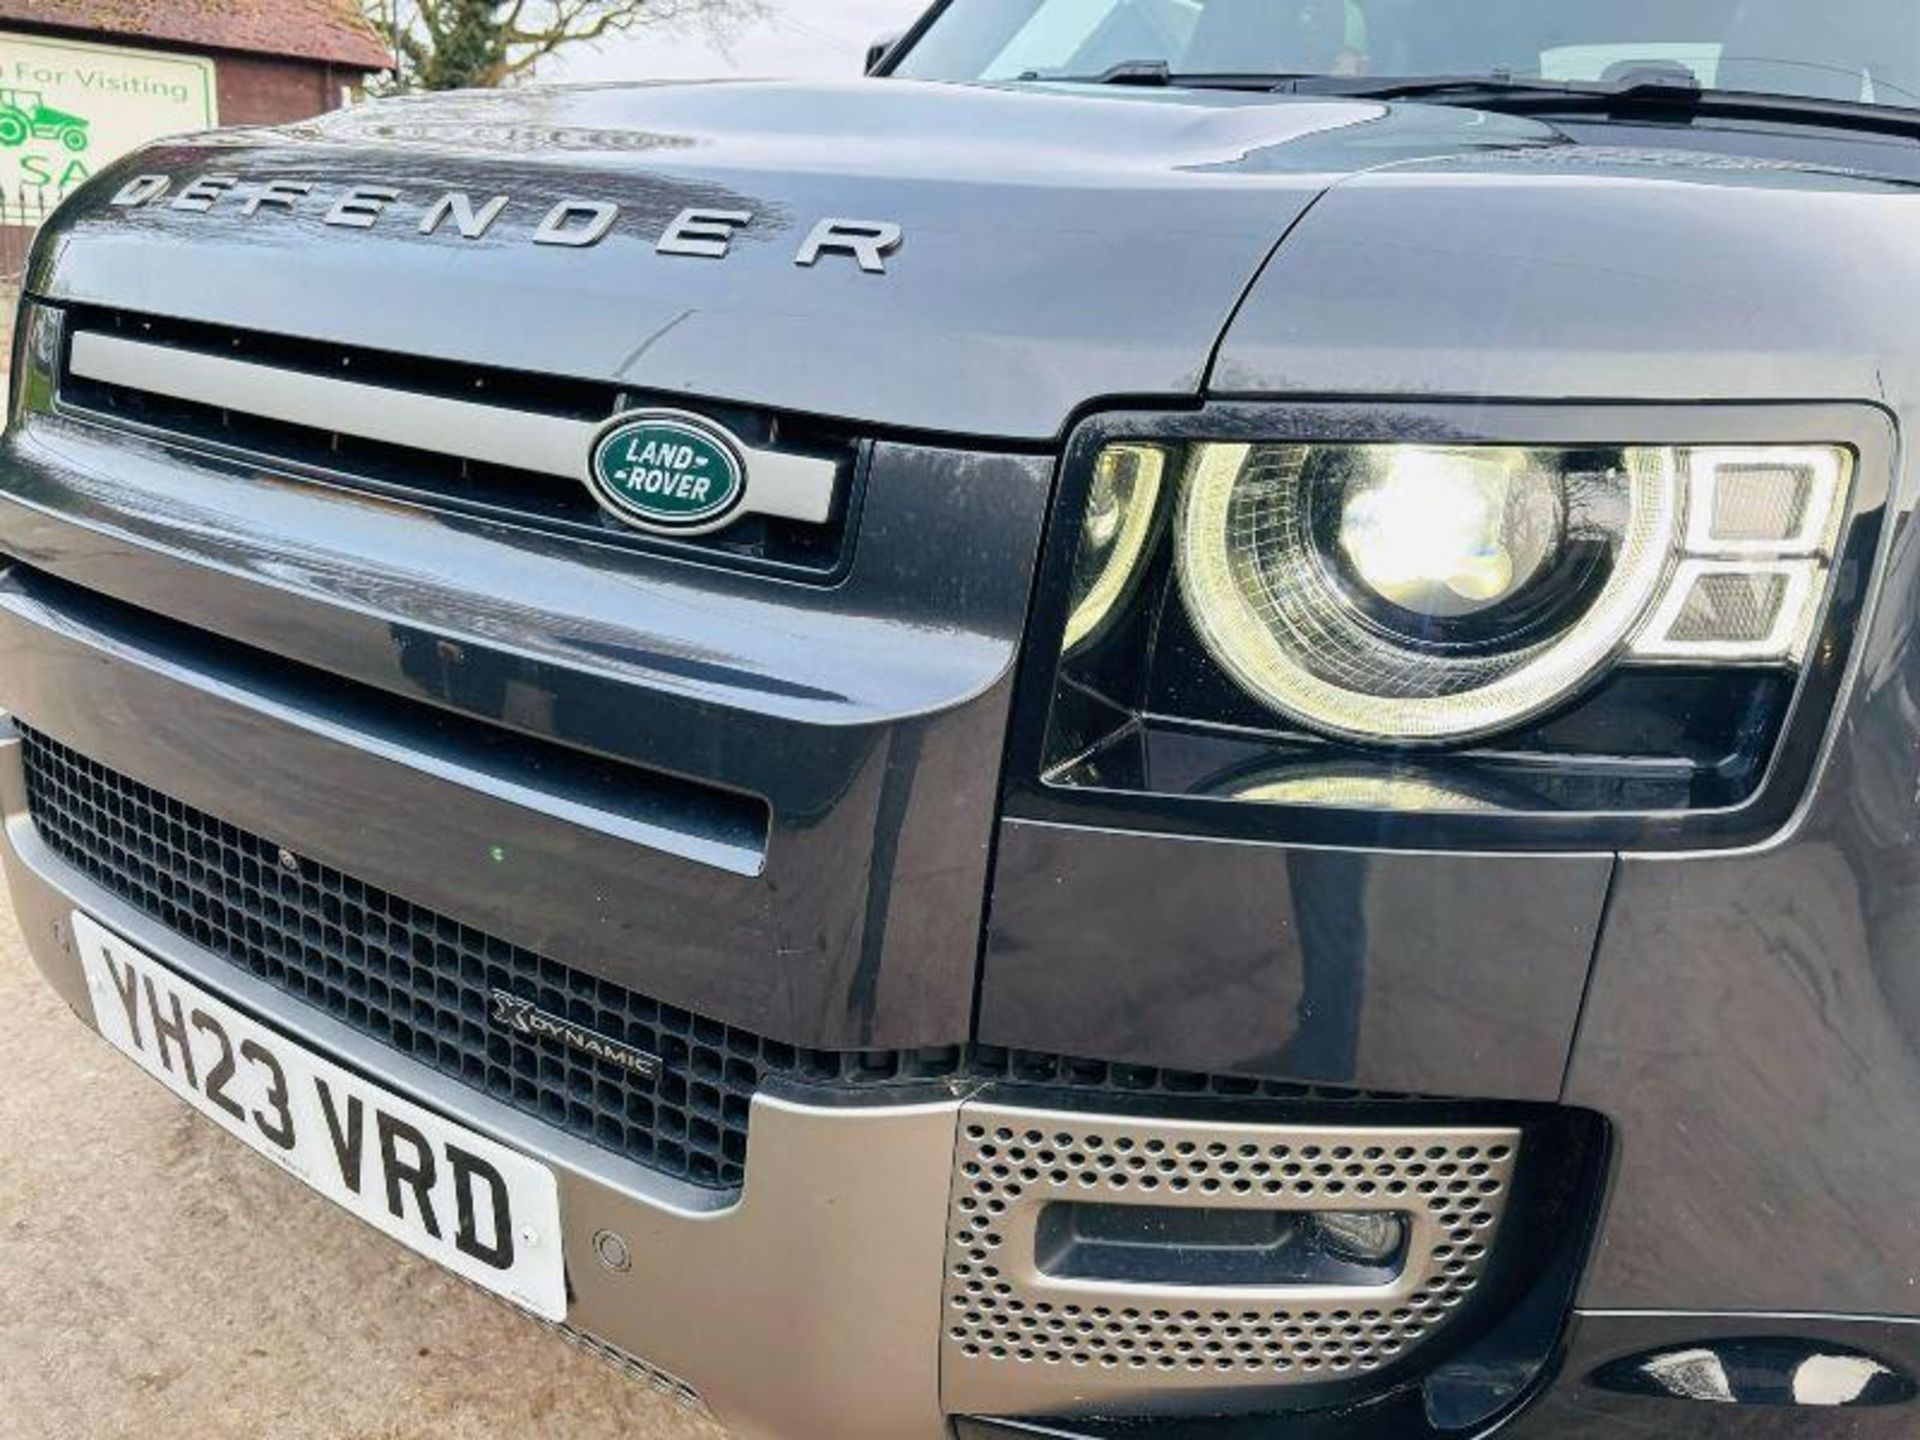 2023 LAND ROVER DEFENDER 90 XDYNAMIC S - 11074 MILES - C/W ELECTRIC TOW BAR  - Image 10 of 18